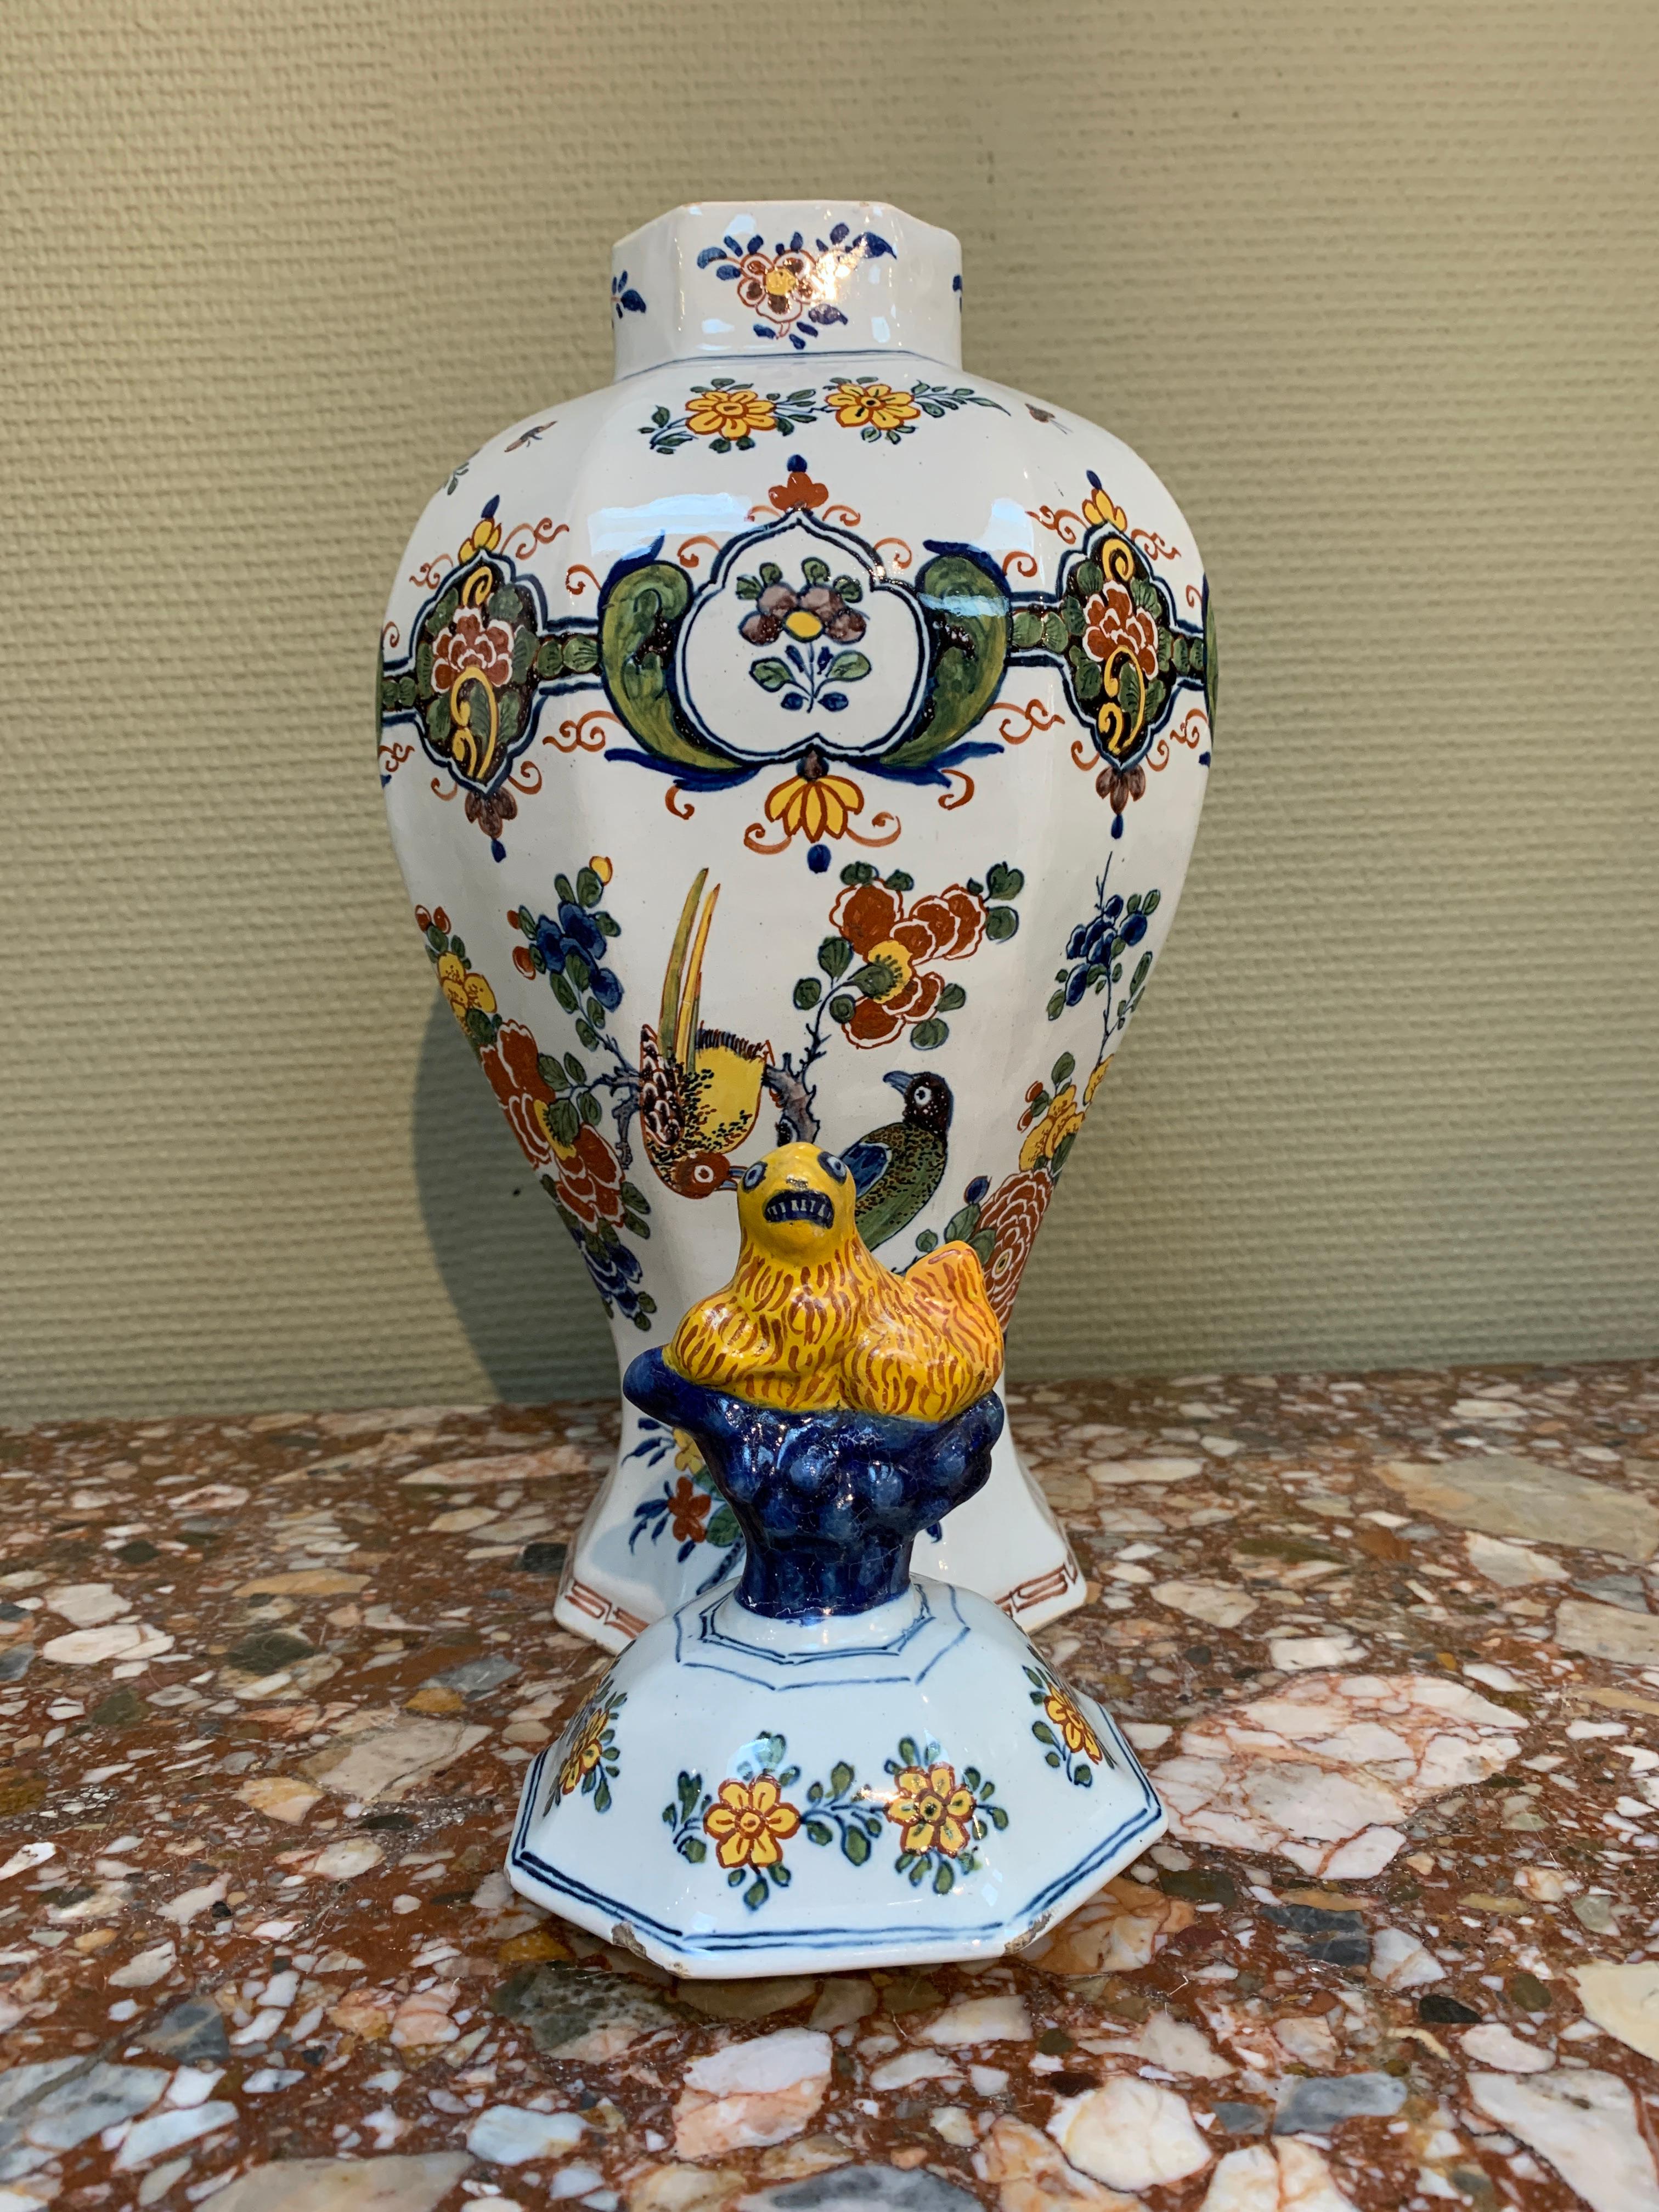 Dutch Delft Polychrome Vase with Flowers and Birds, Mid 18th Century For Sale 1